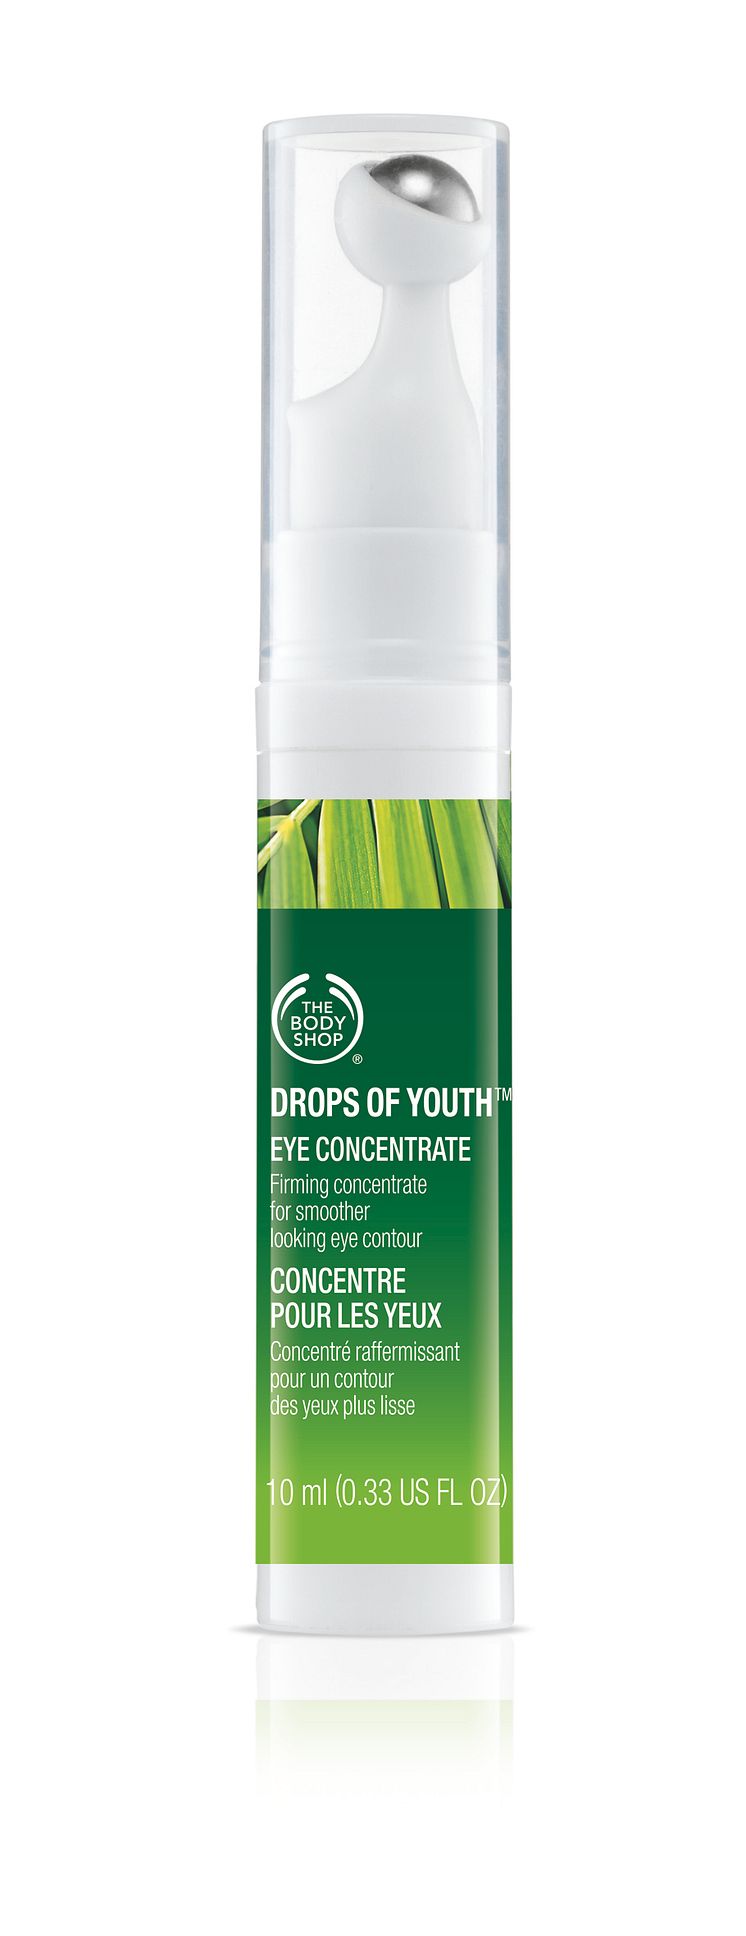 Drops of Youth Eye Concentrate (with lid)